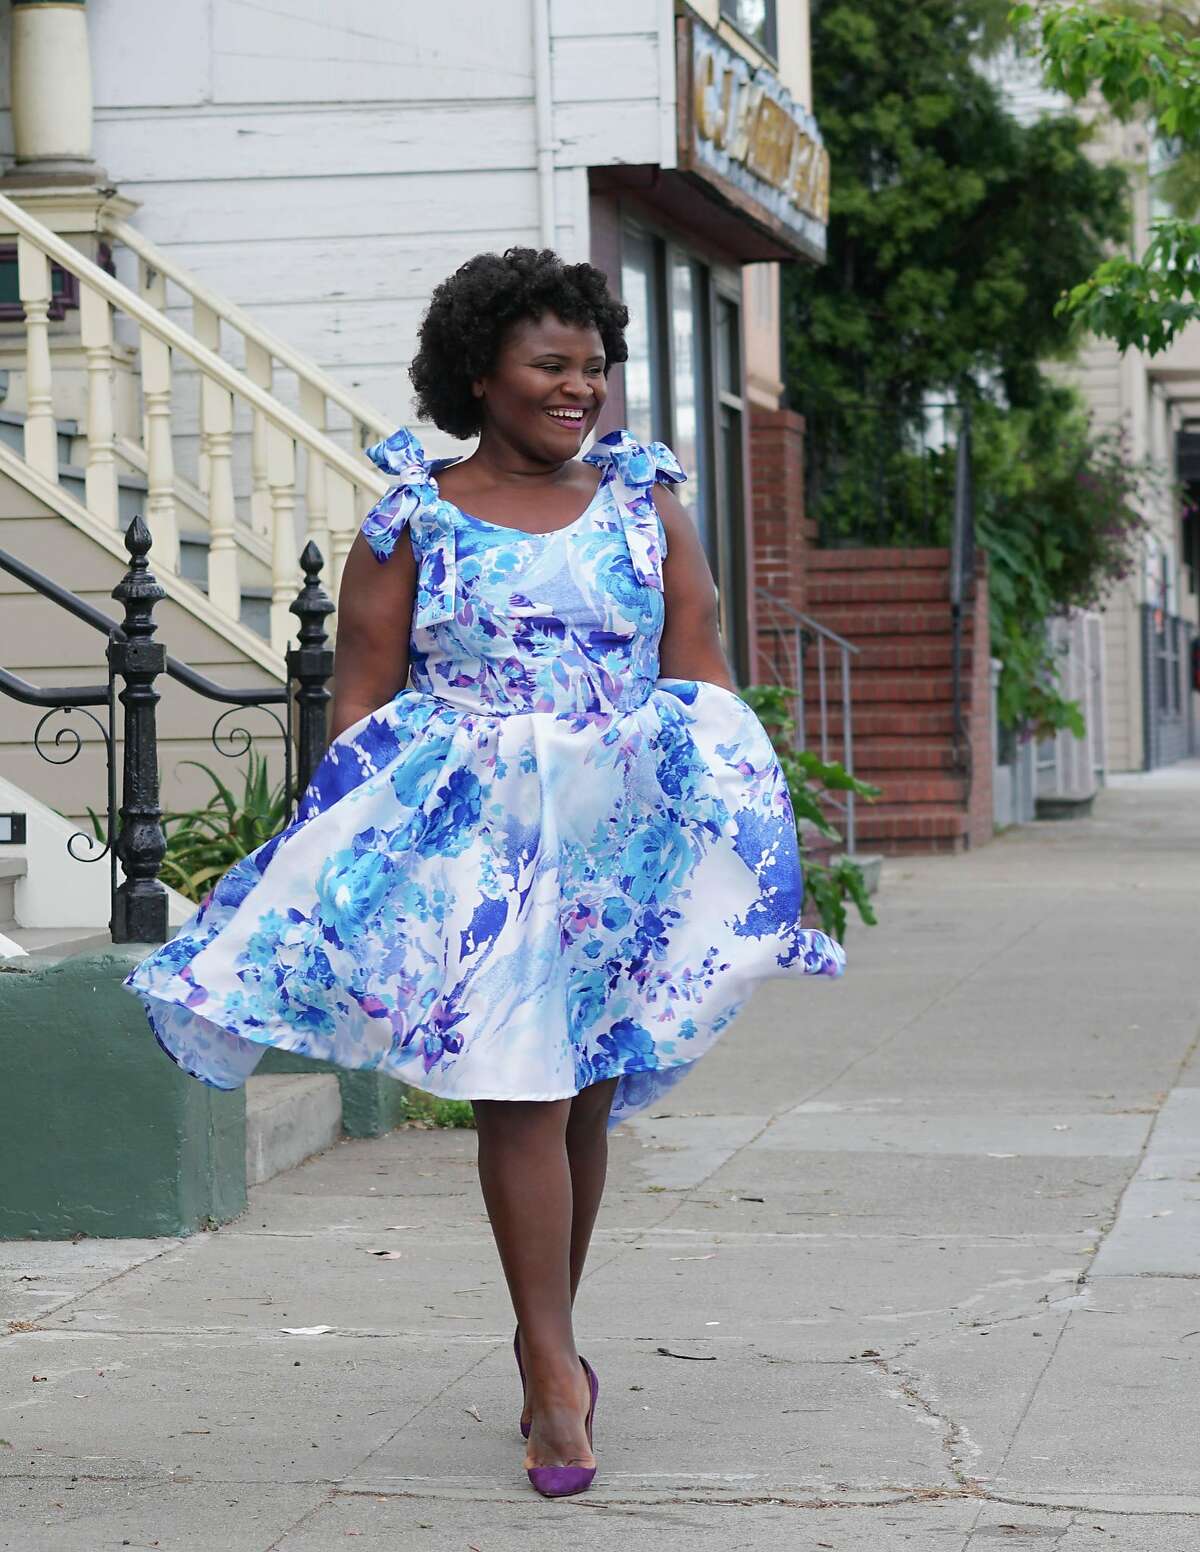 Aquila Farrell is a biochemist-turned-fashion blogger who writes under the name MsChurchDress.